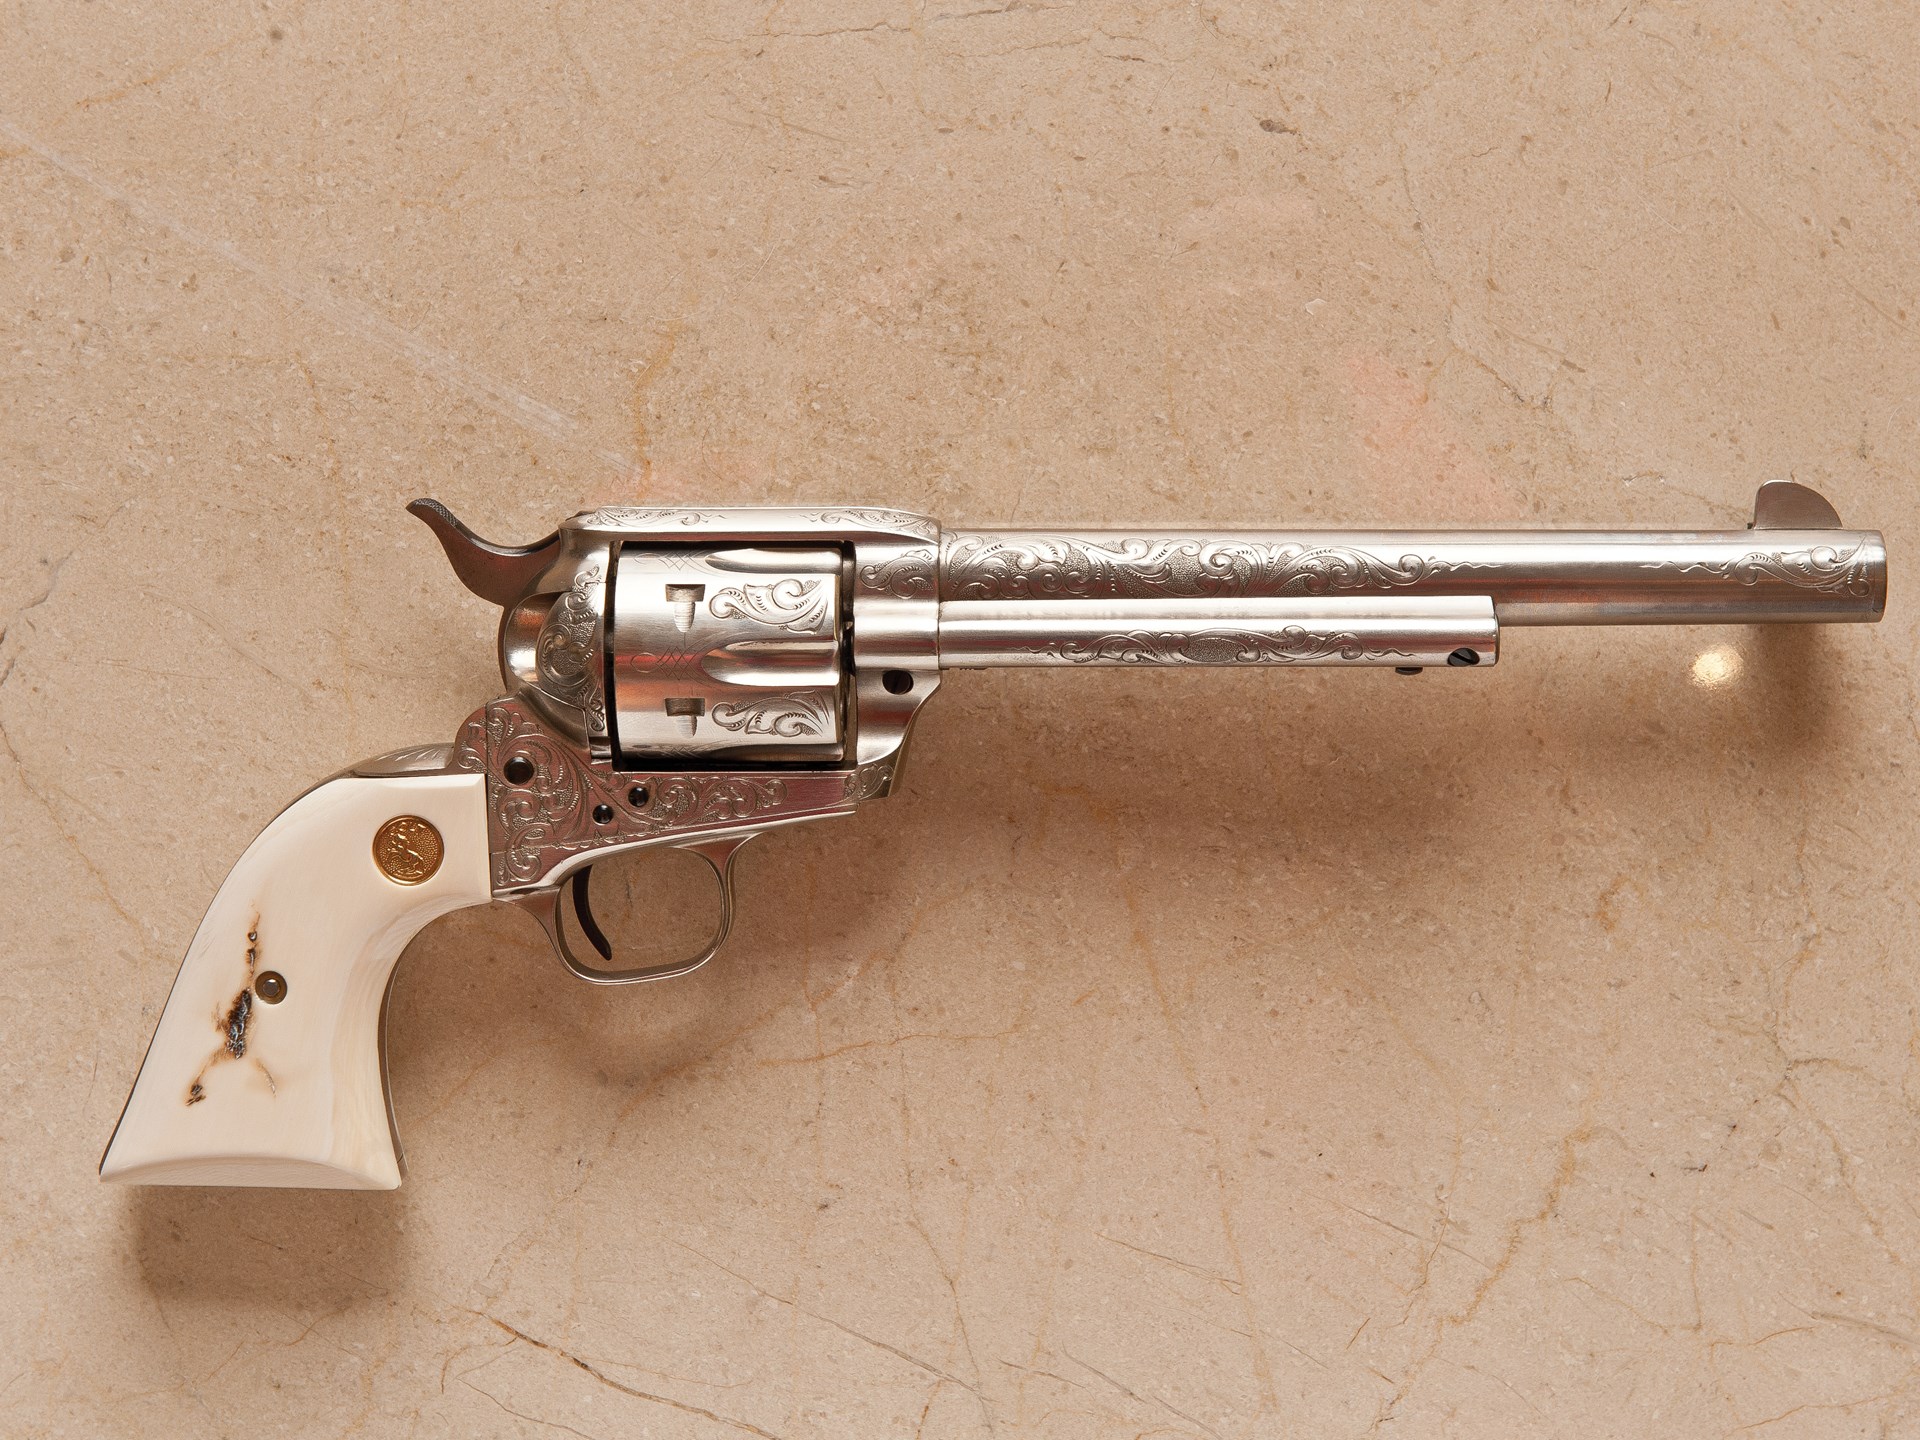 Colt 45 Caliber Single Action Army Revolver The Milhous Collection Rm Sotheby S